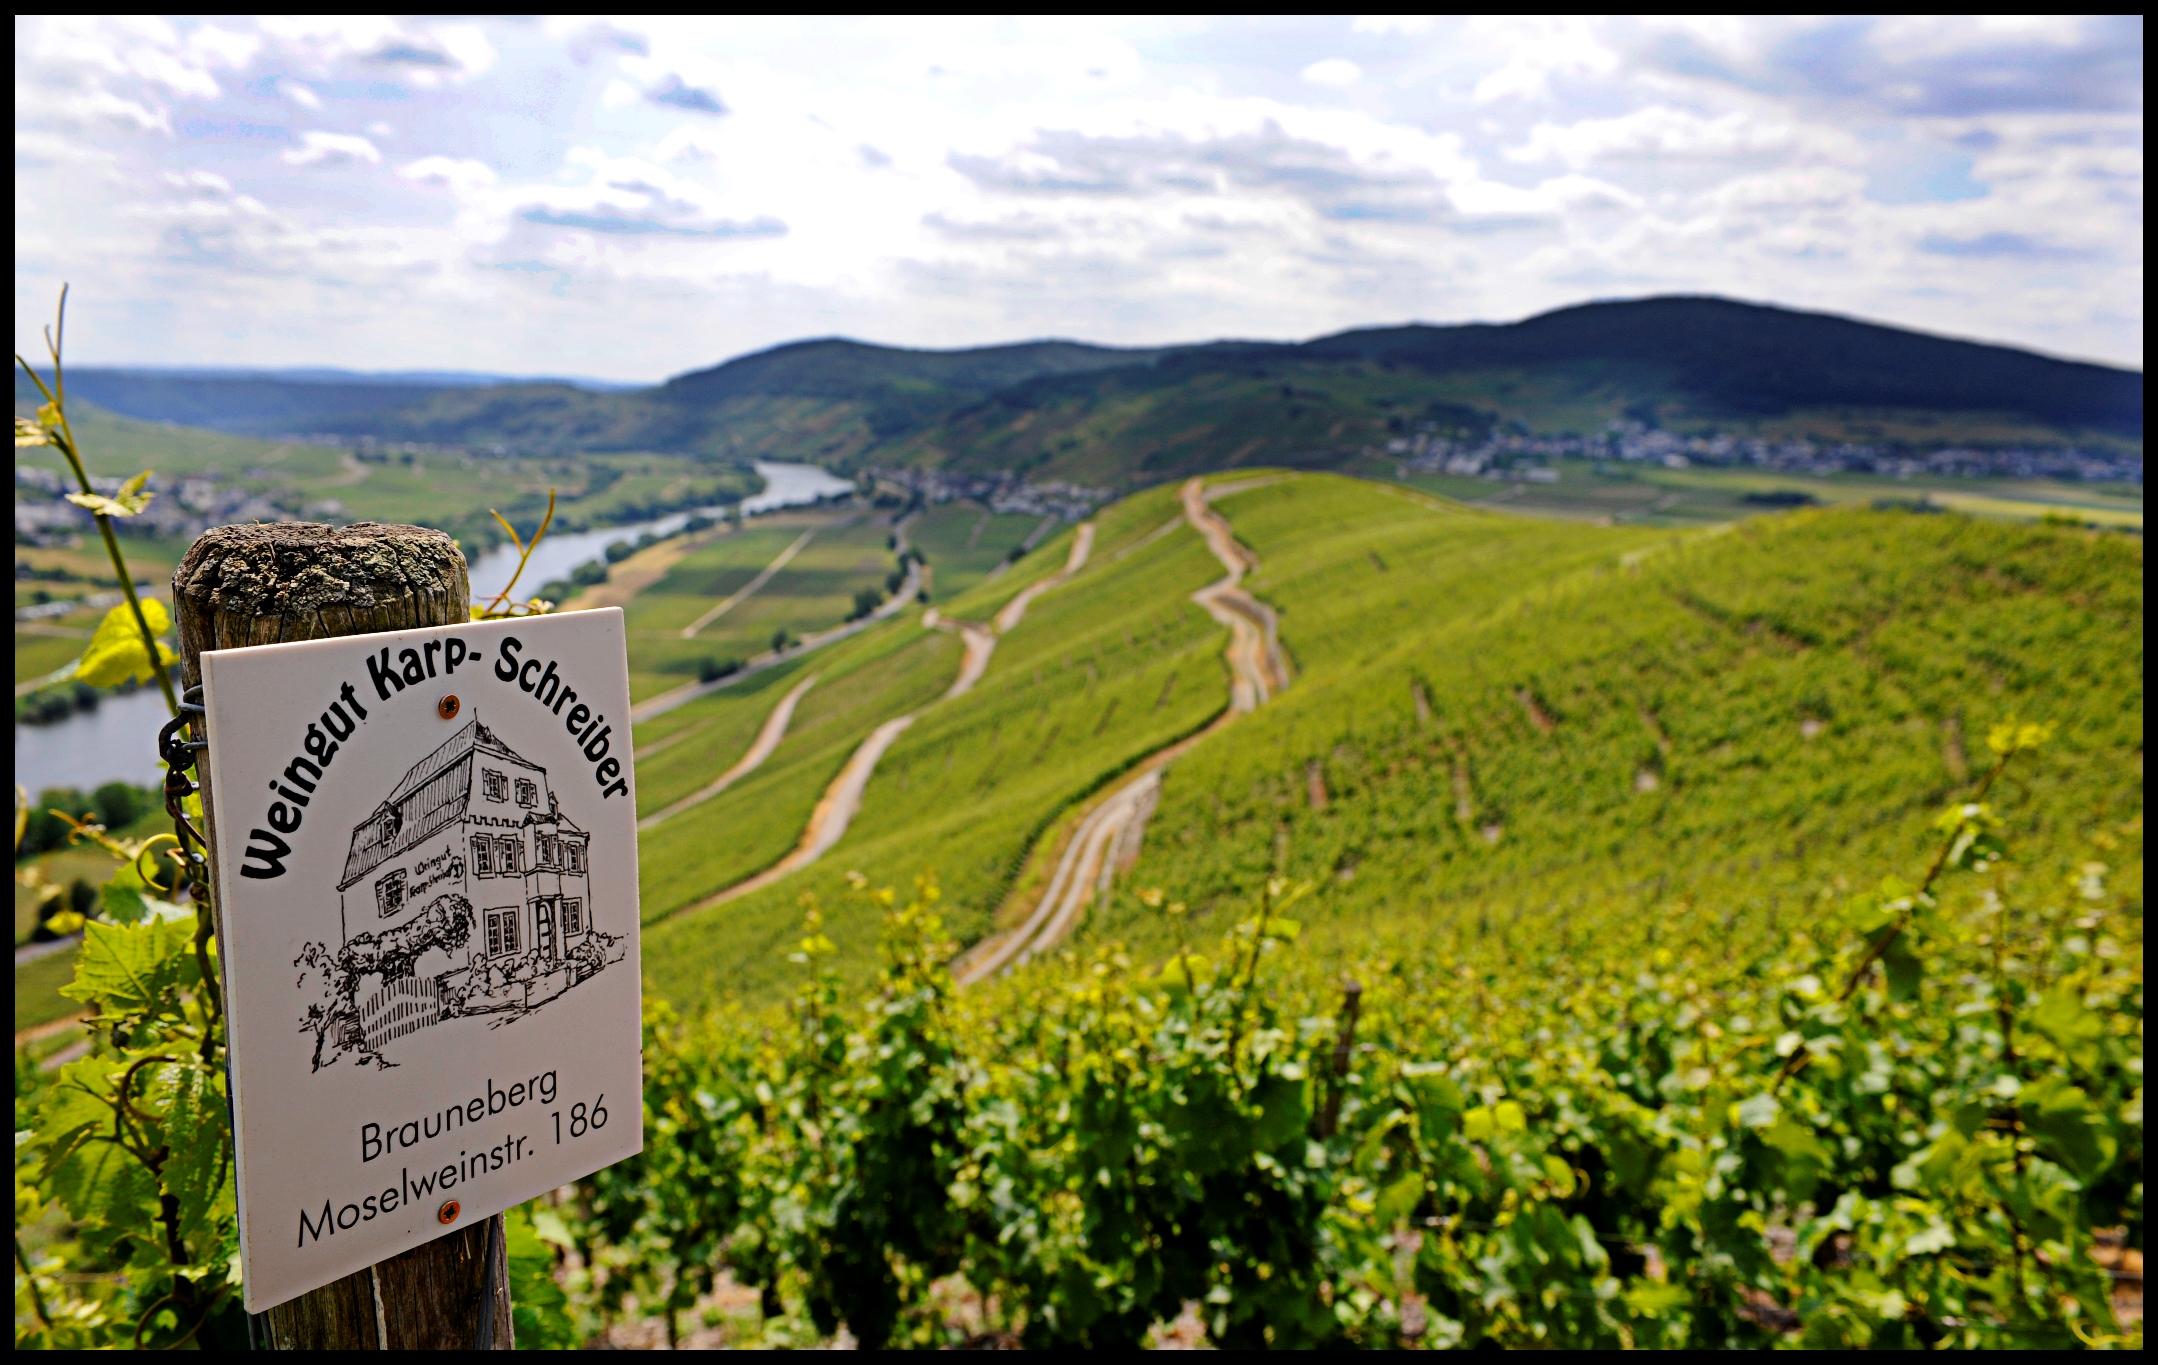 Weinberge in bester Mosellage